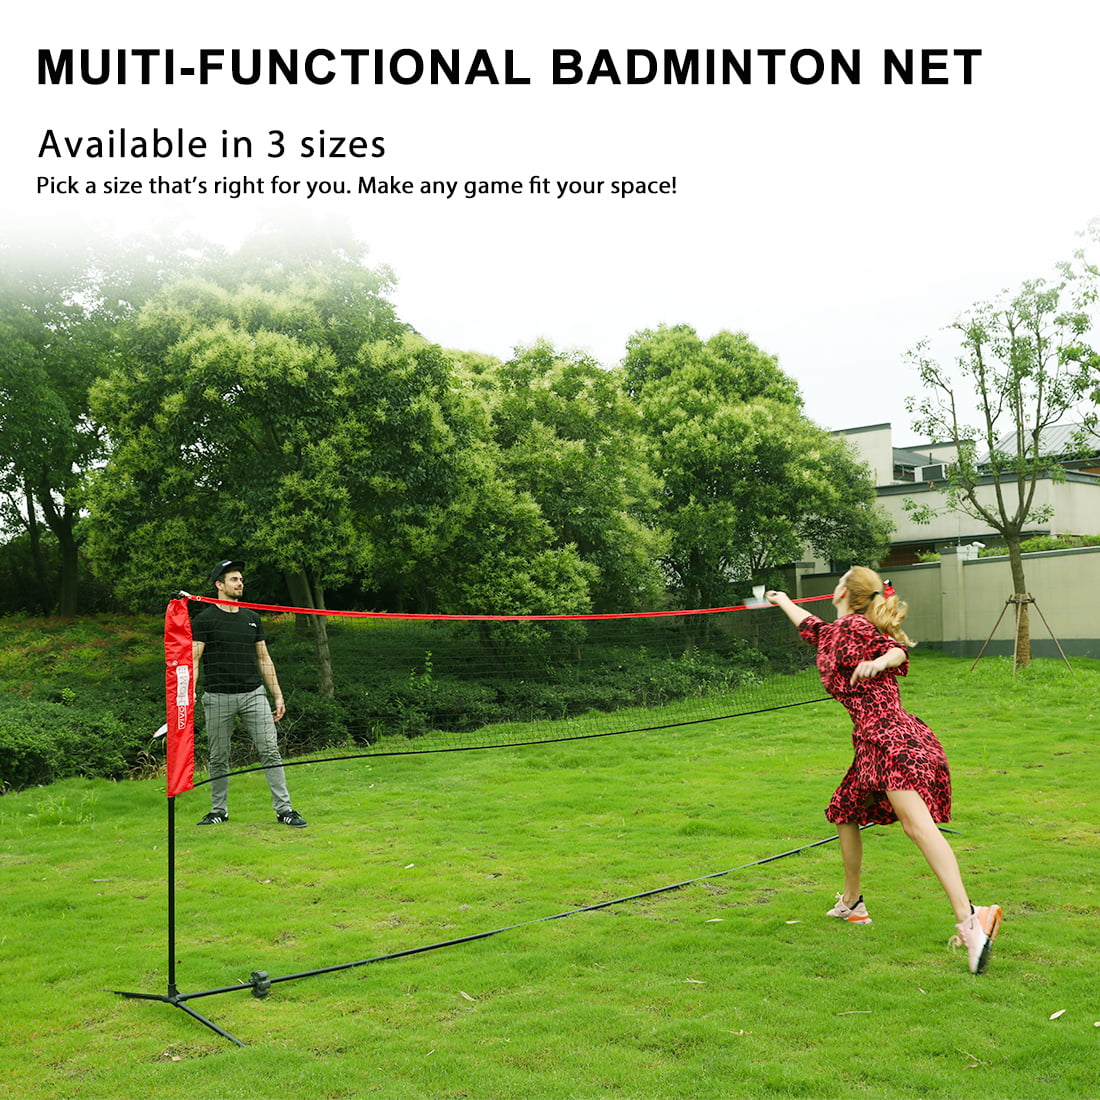 Details about   22FT Durable Pickleball Tennis Net with Stand & Carrying Bag Steel Poles Train 